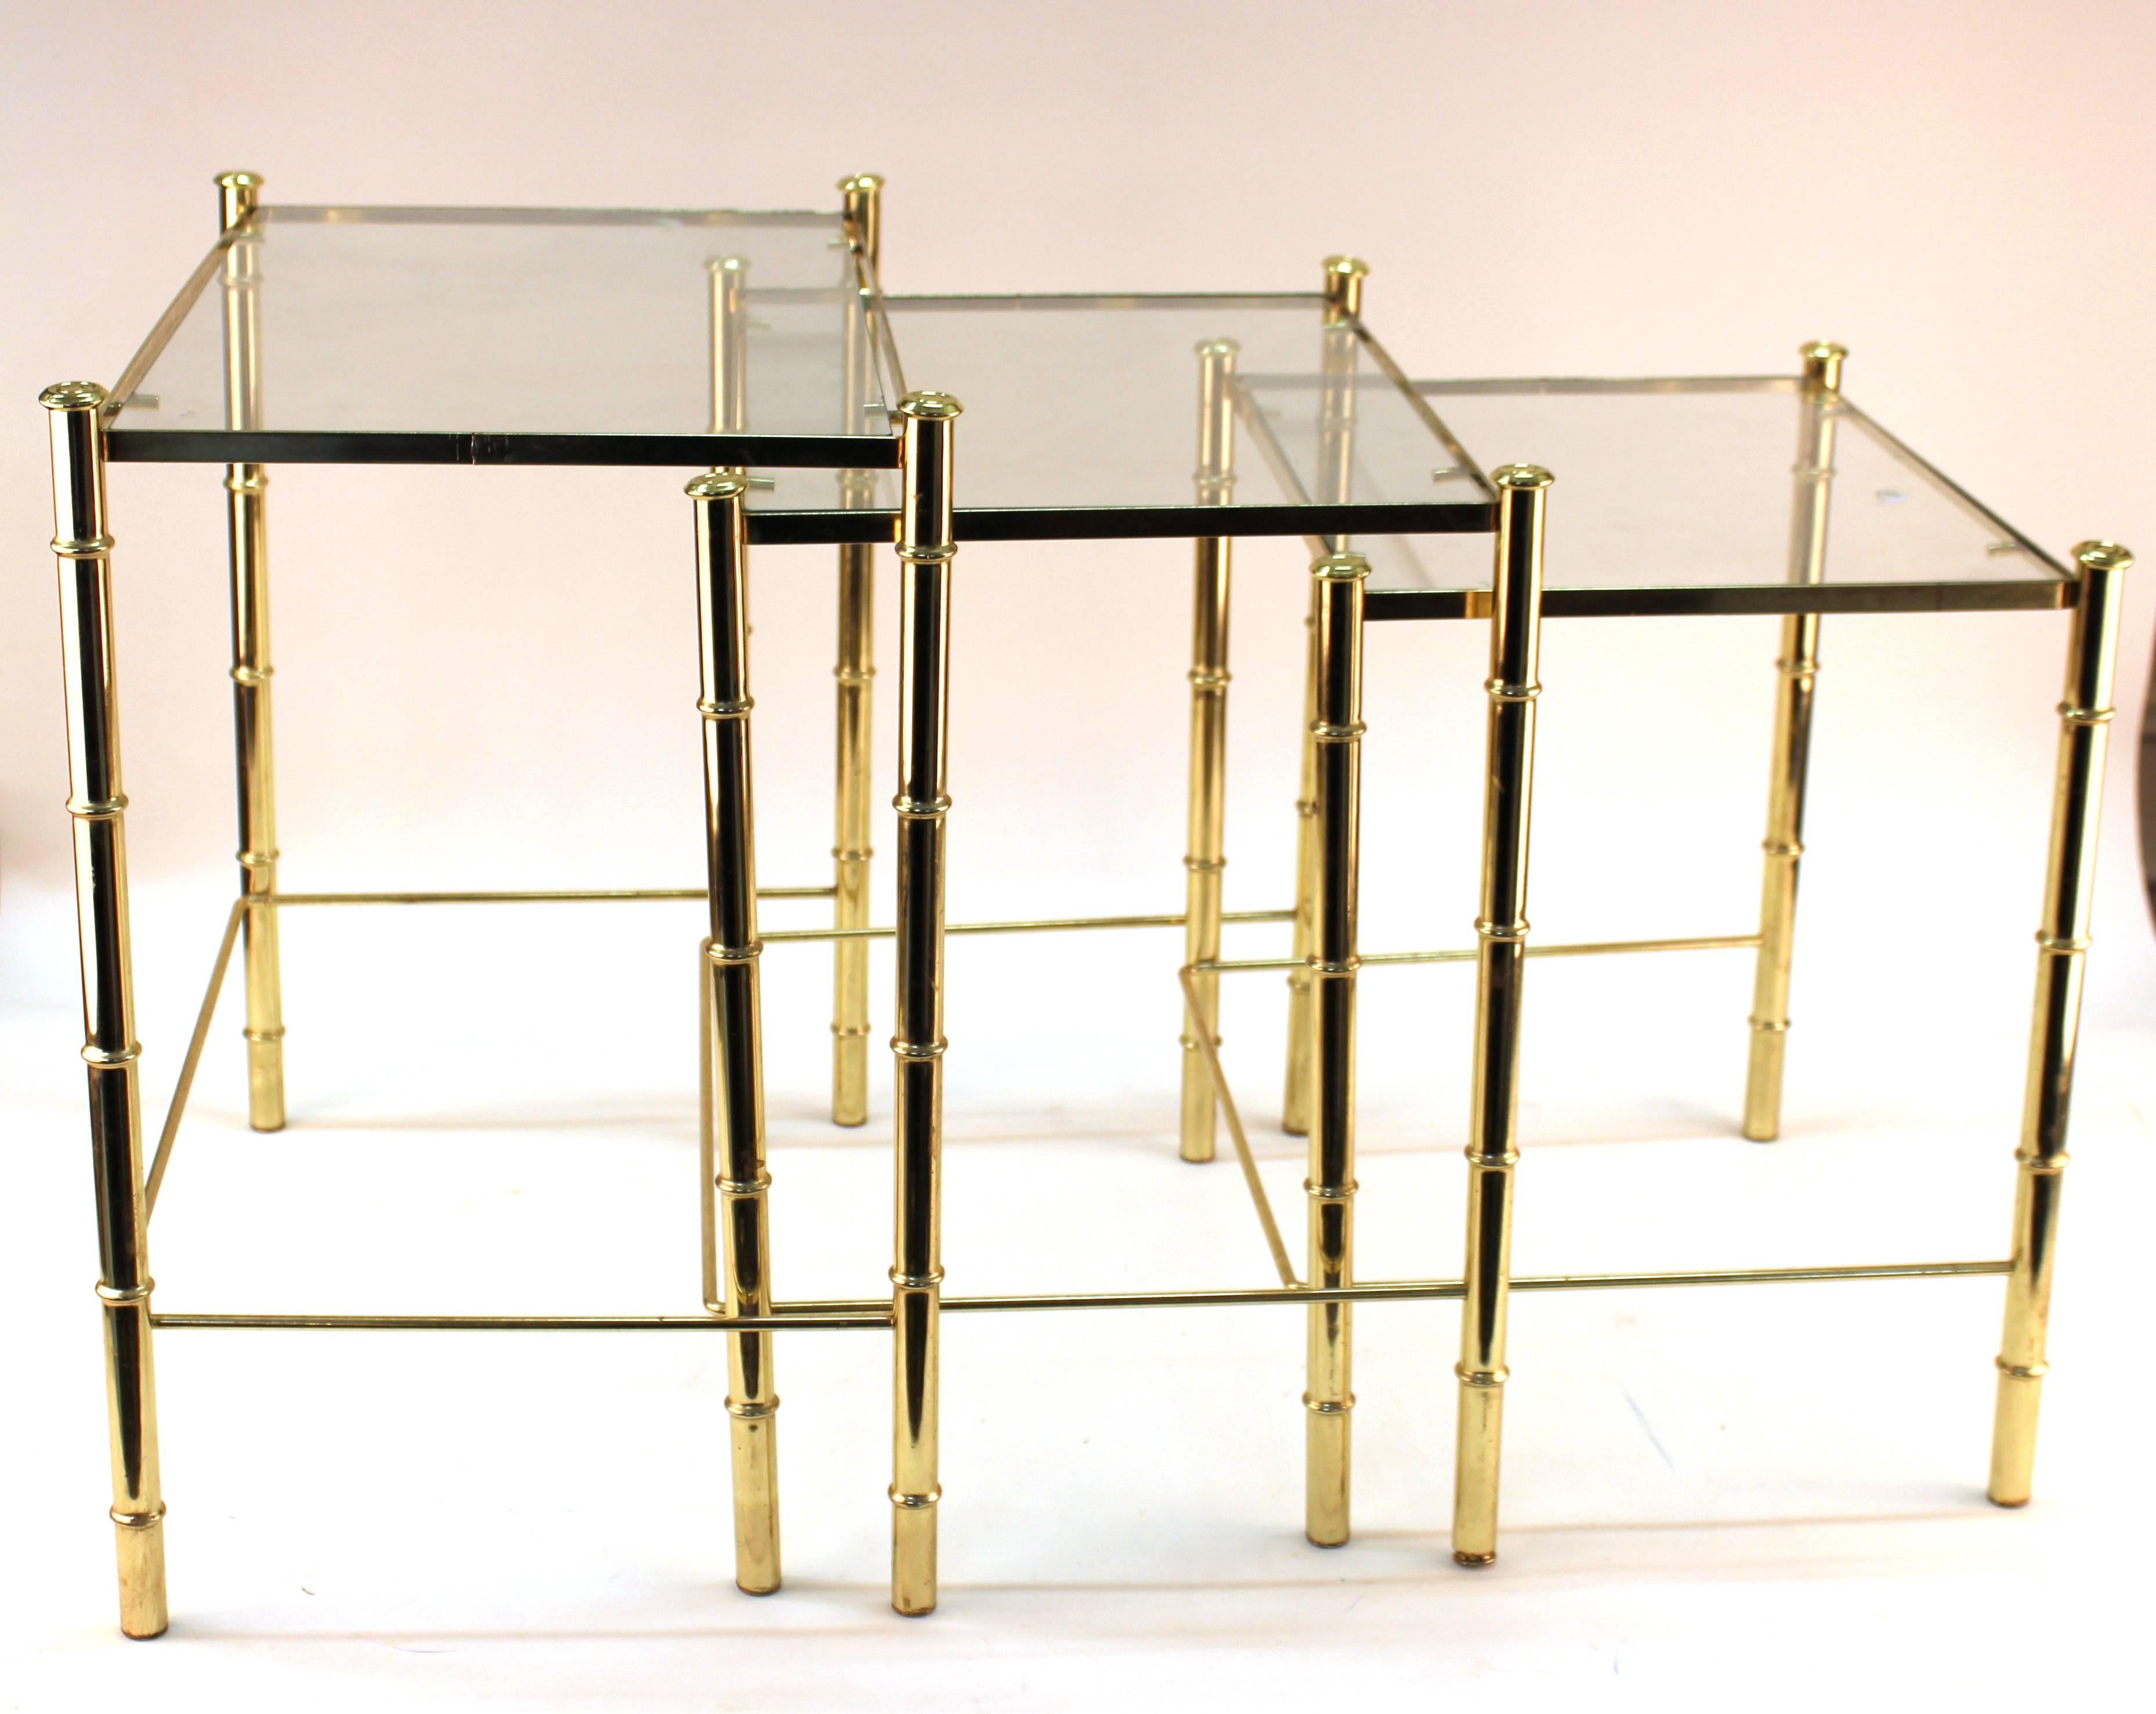 Nesting table and magazine holder set in gilt metal from France. Crafted with faux bamboo motif. Set includes three tables with gilt frames and glass tops. The magazine holder features a faux bamboo handle, criss cross pattern on sides and faux